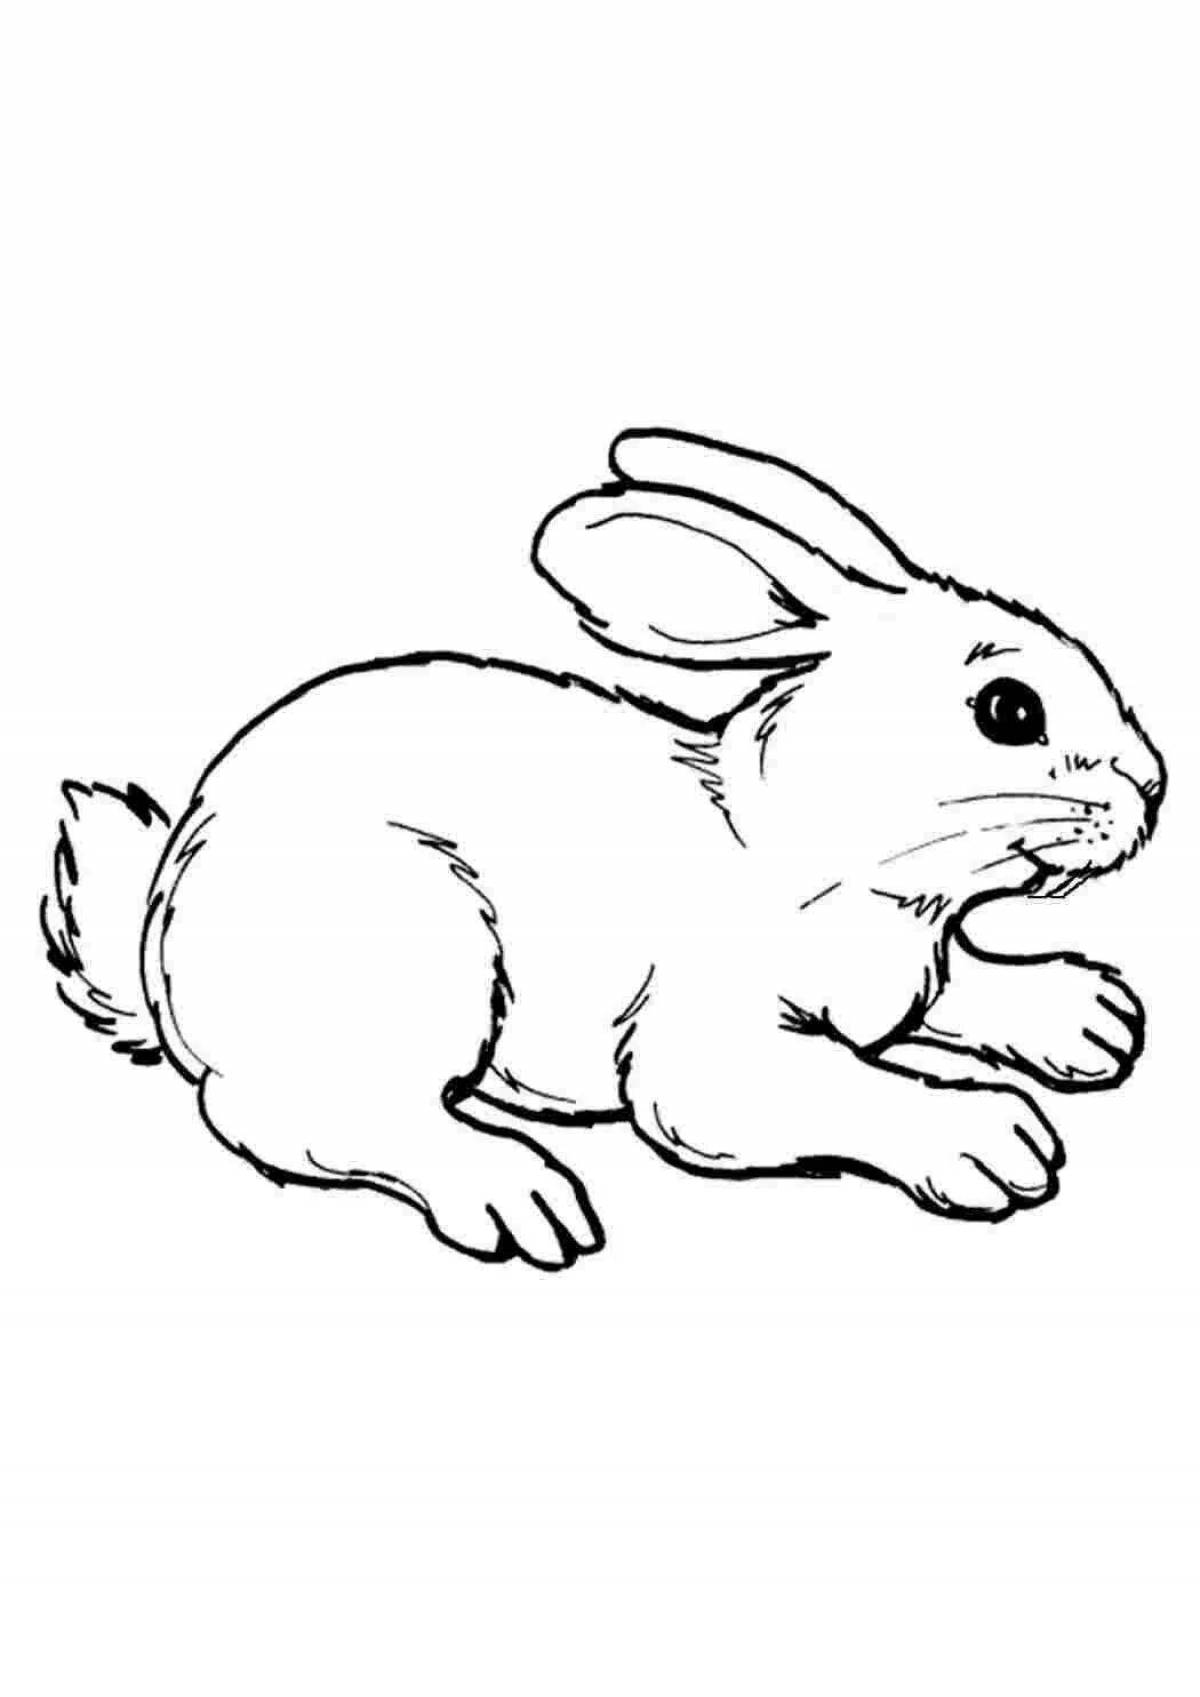 Playful bunny drawing for kids